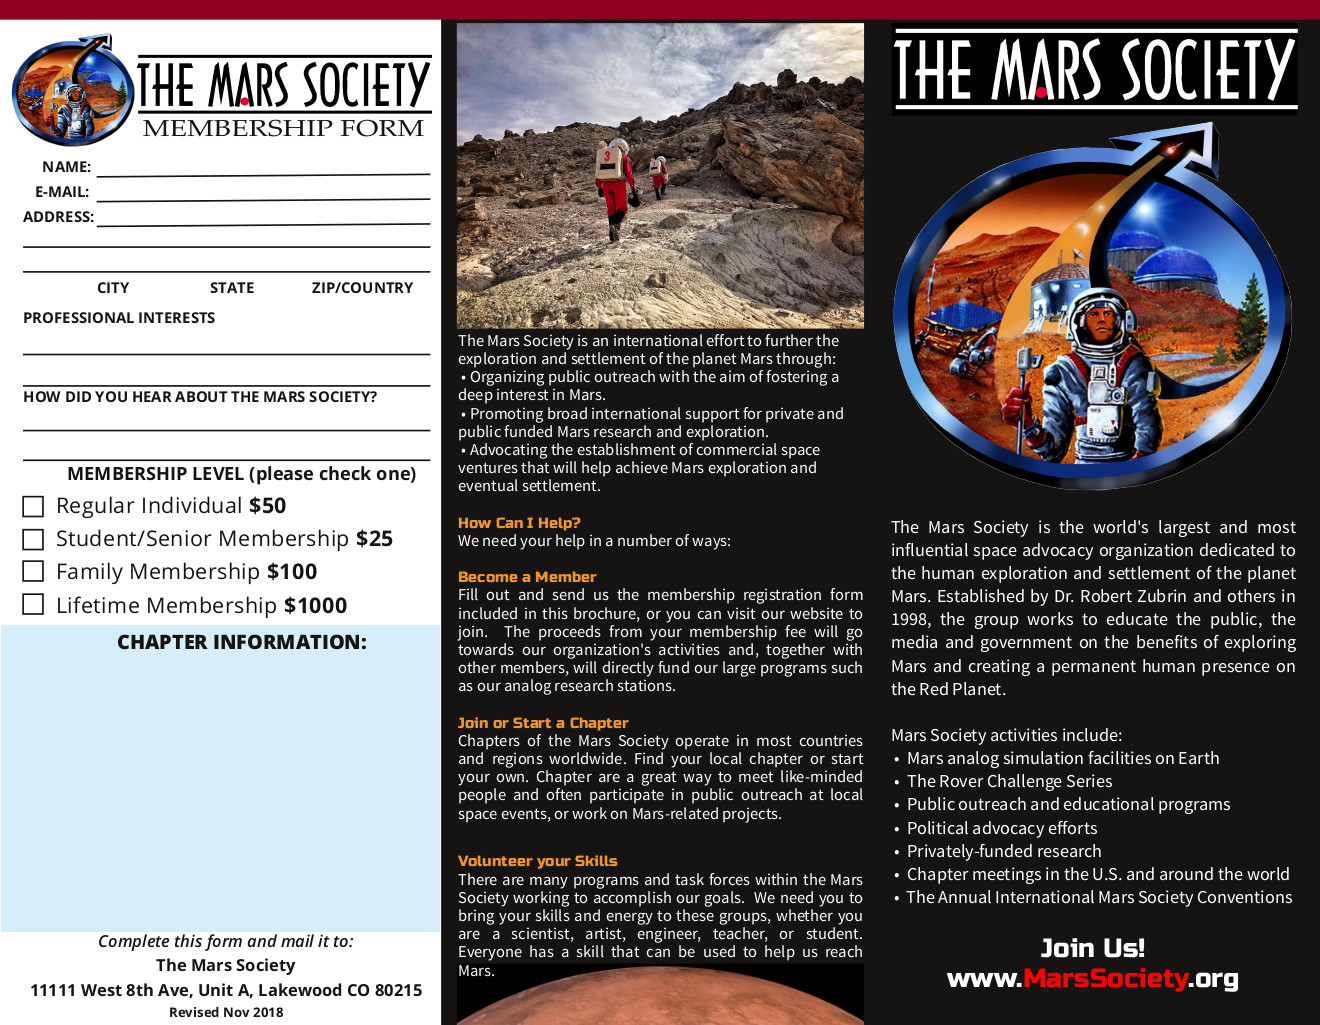 TMS Trifold Brochure Front.jpg